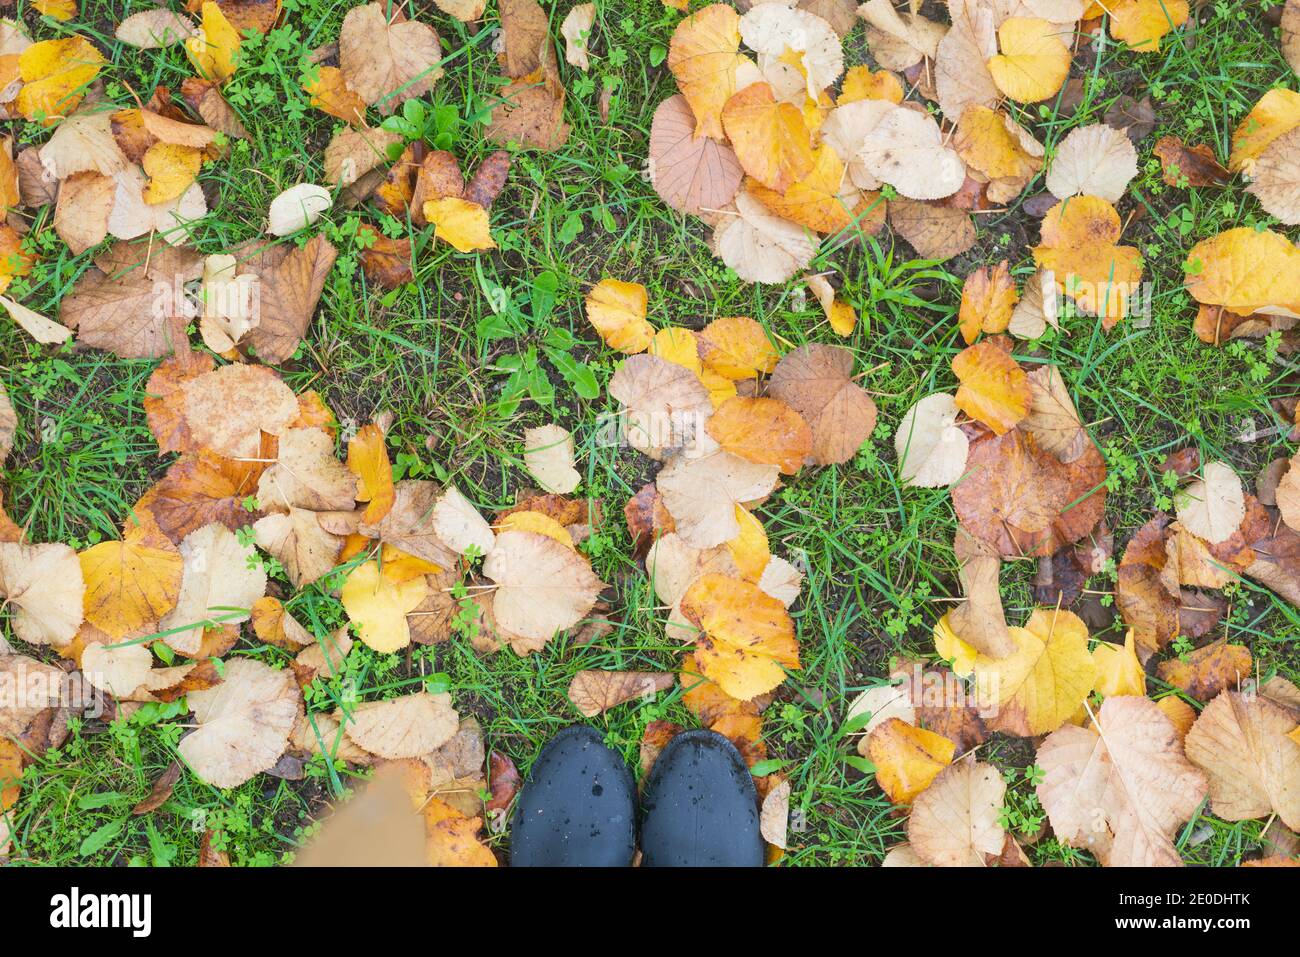 Autumn fall colorful yellow and brown leaves on the grass with woman boots and yellow rain jacket Stock Photo